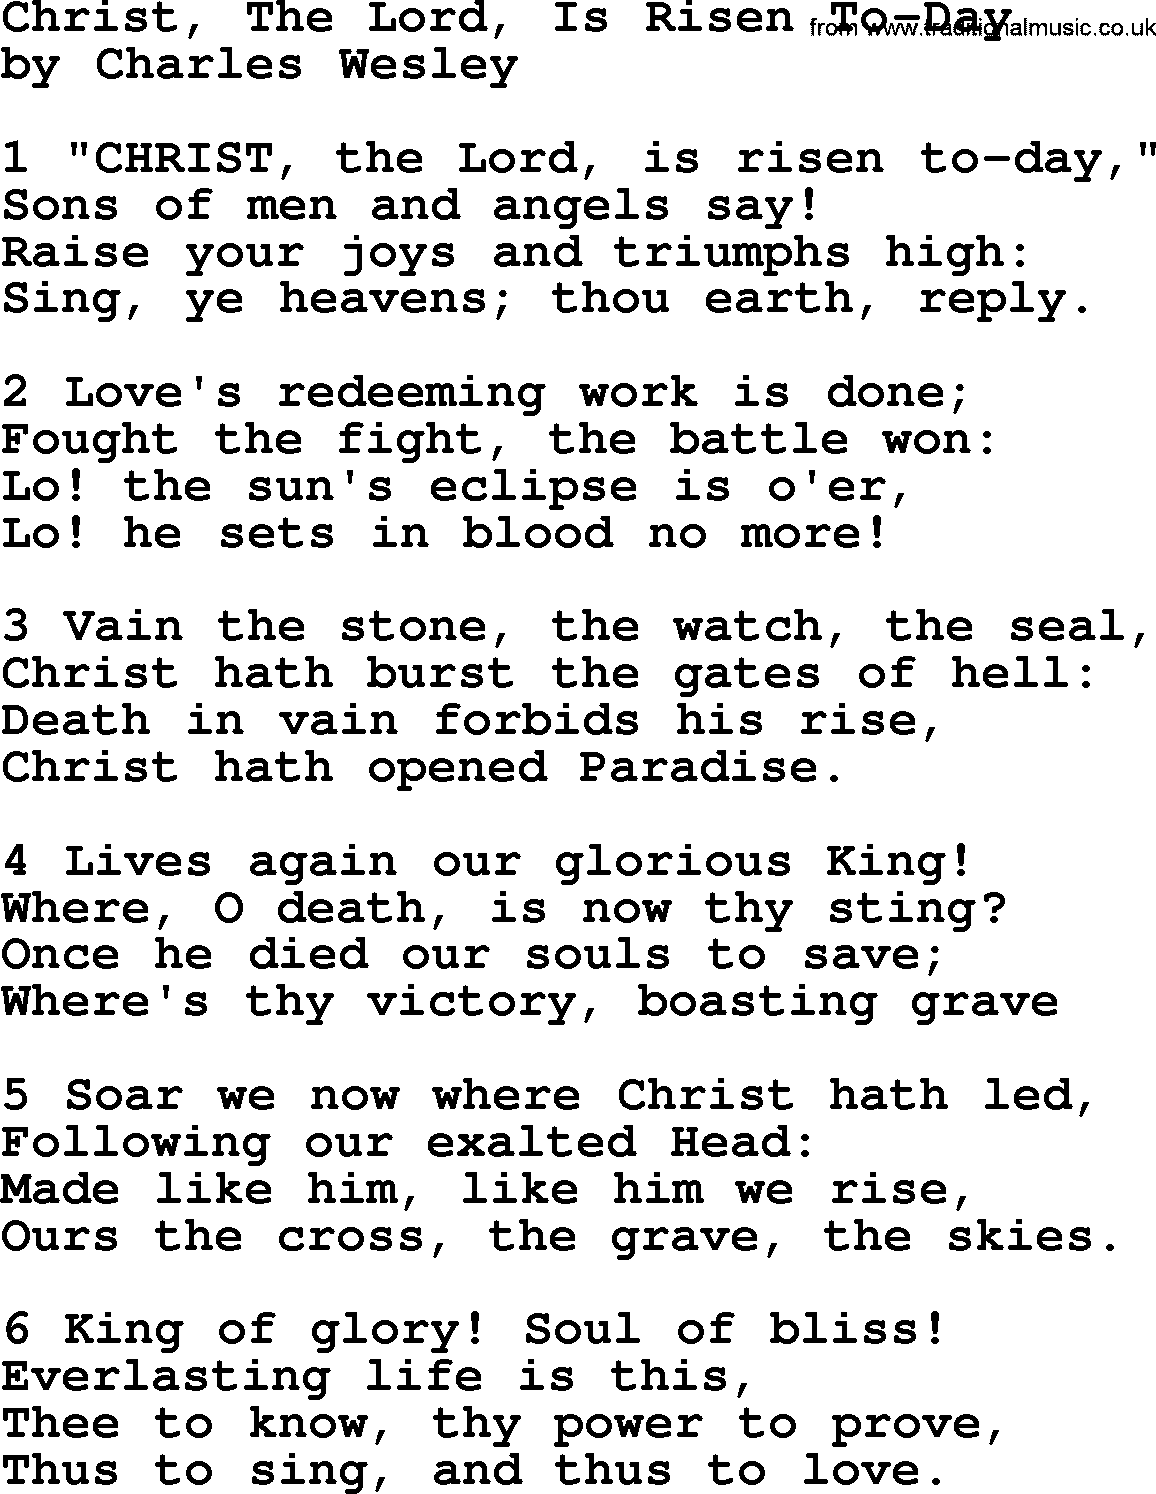 Charles Wesley hymn: Christ, The Lord, Is Risen To-Day, lyrics